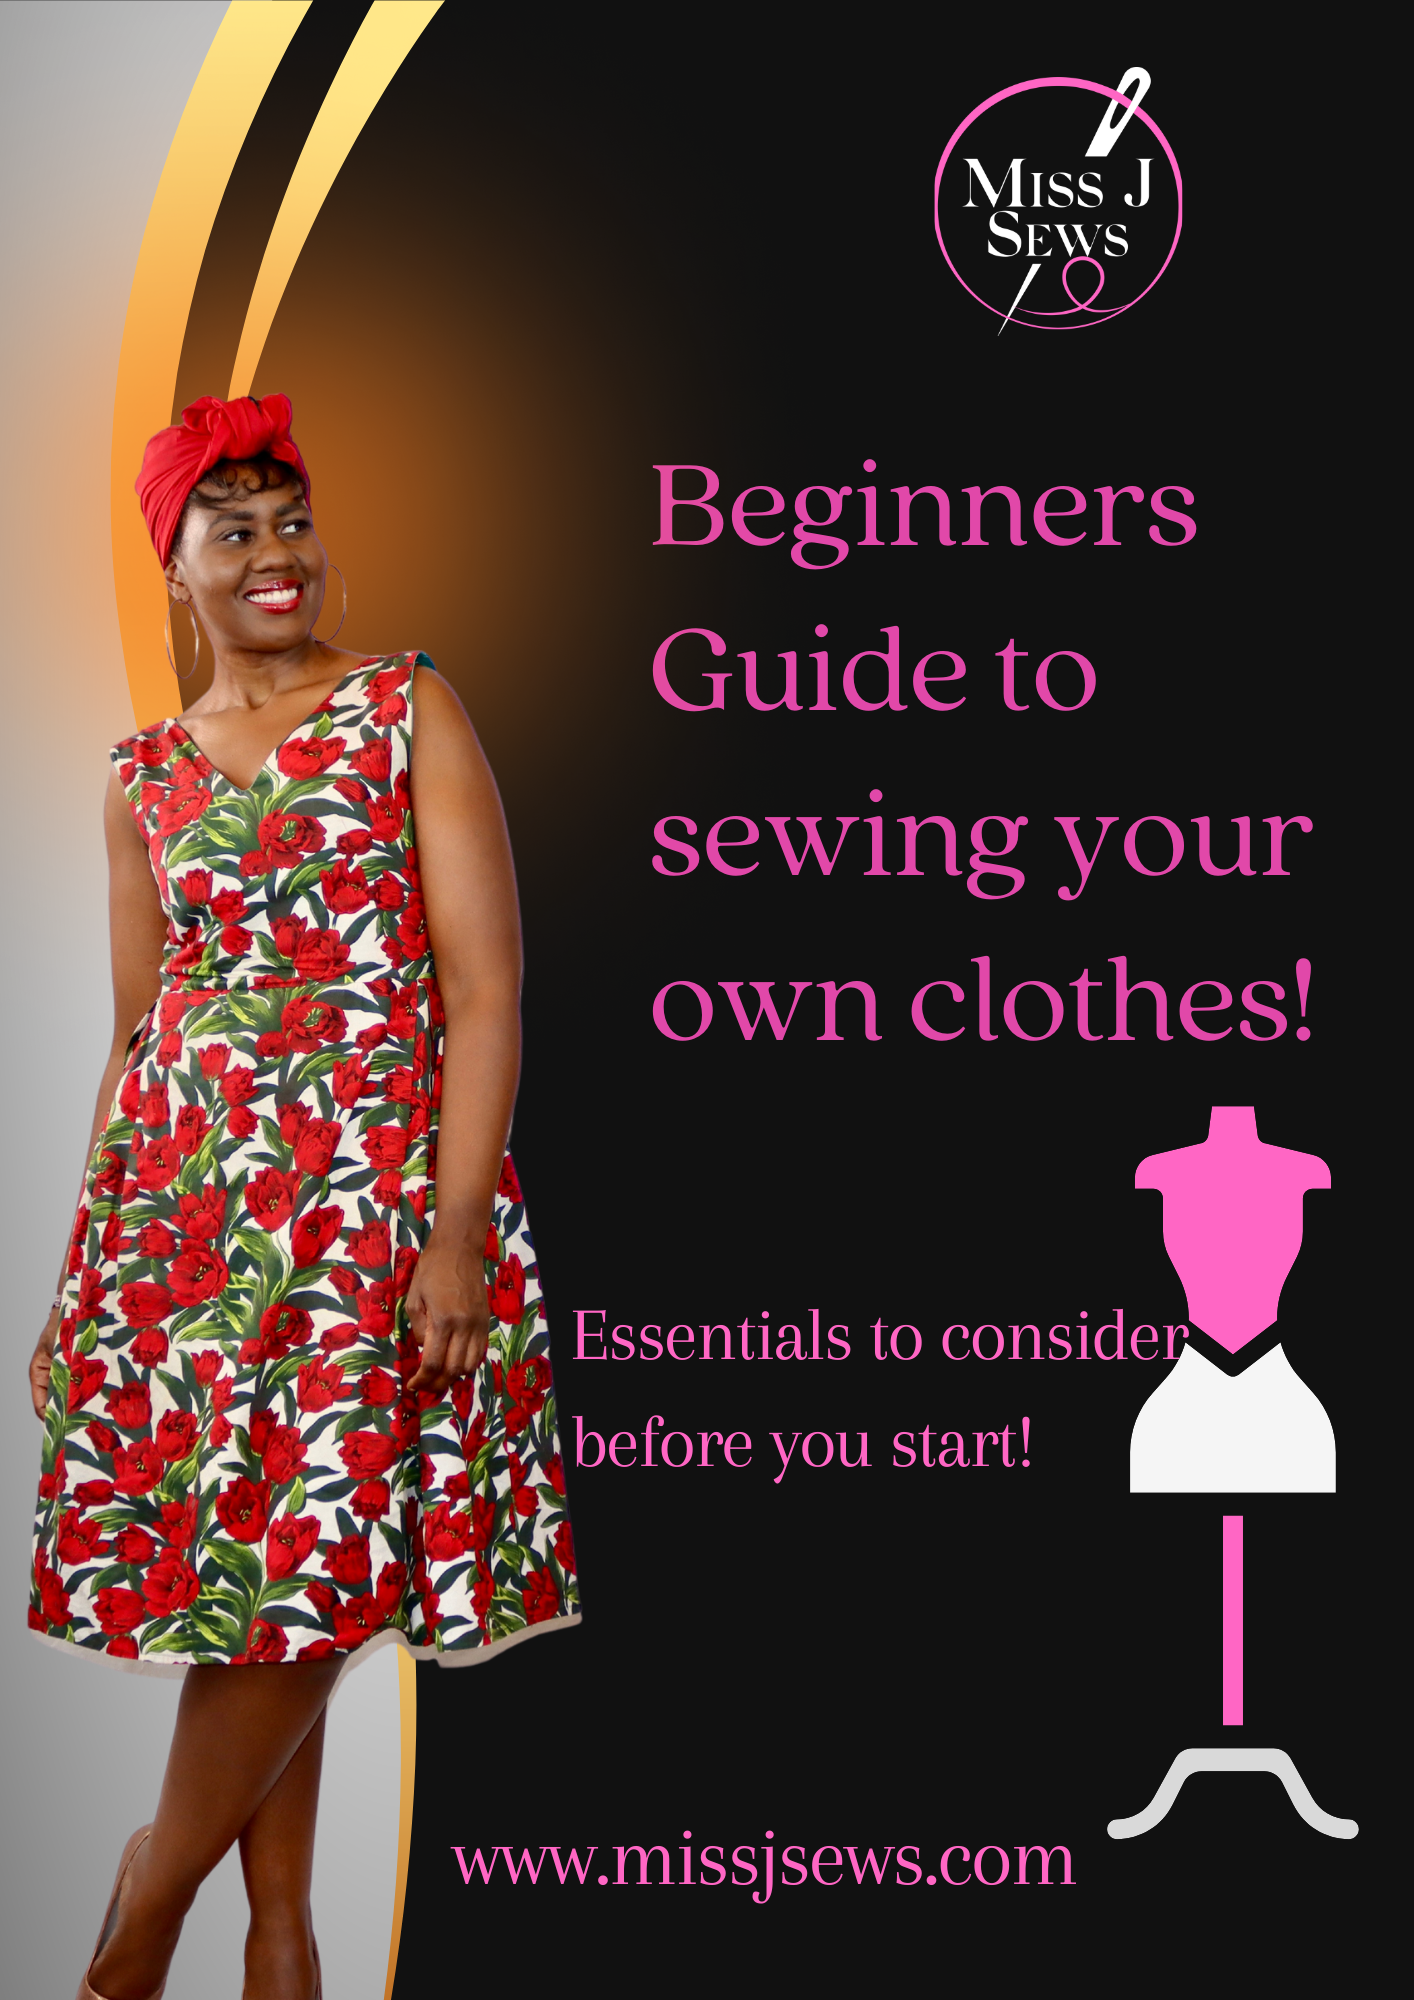 Miss J , a Black woman wearing a sleeveless v-necked, sleeveless dress wit a bright red poppy print. She is wearing a red headscarf . She is standing and looking to the left towards to words Beginners Guide to sewing your own clothes! Essentials to consider before your start!  The website address www.missjsews is at the bottom. The MissJ Sews logo of the needle and thread is in the top right hand corner.